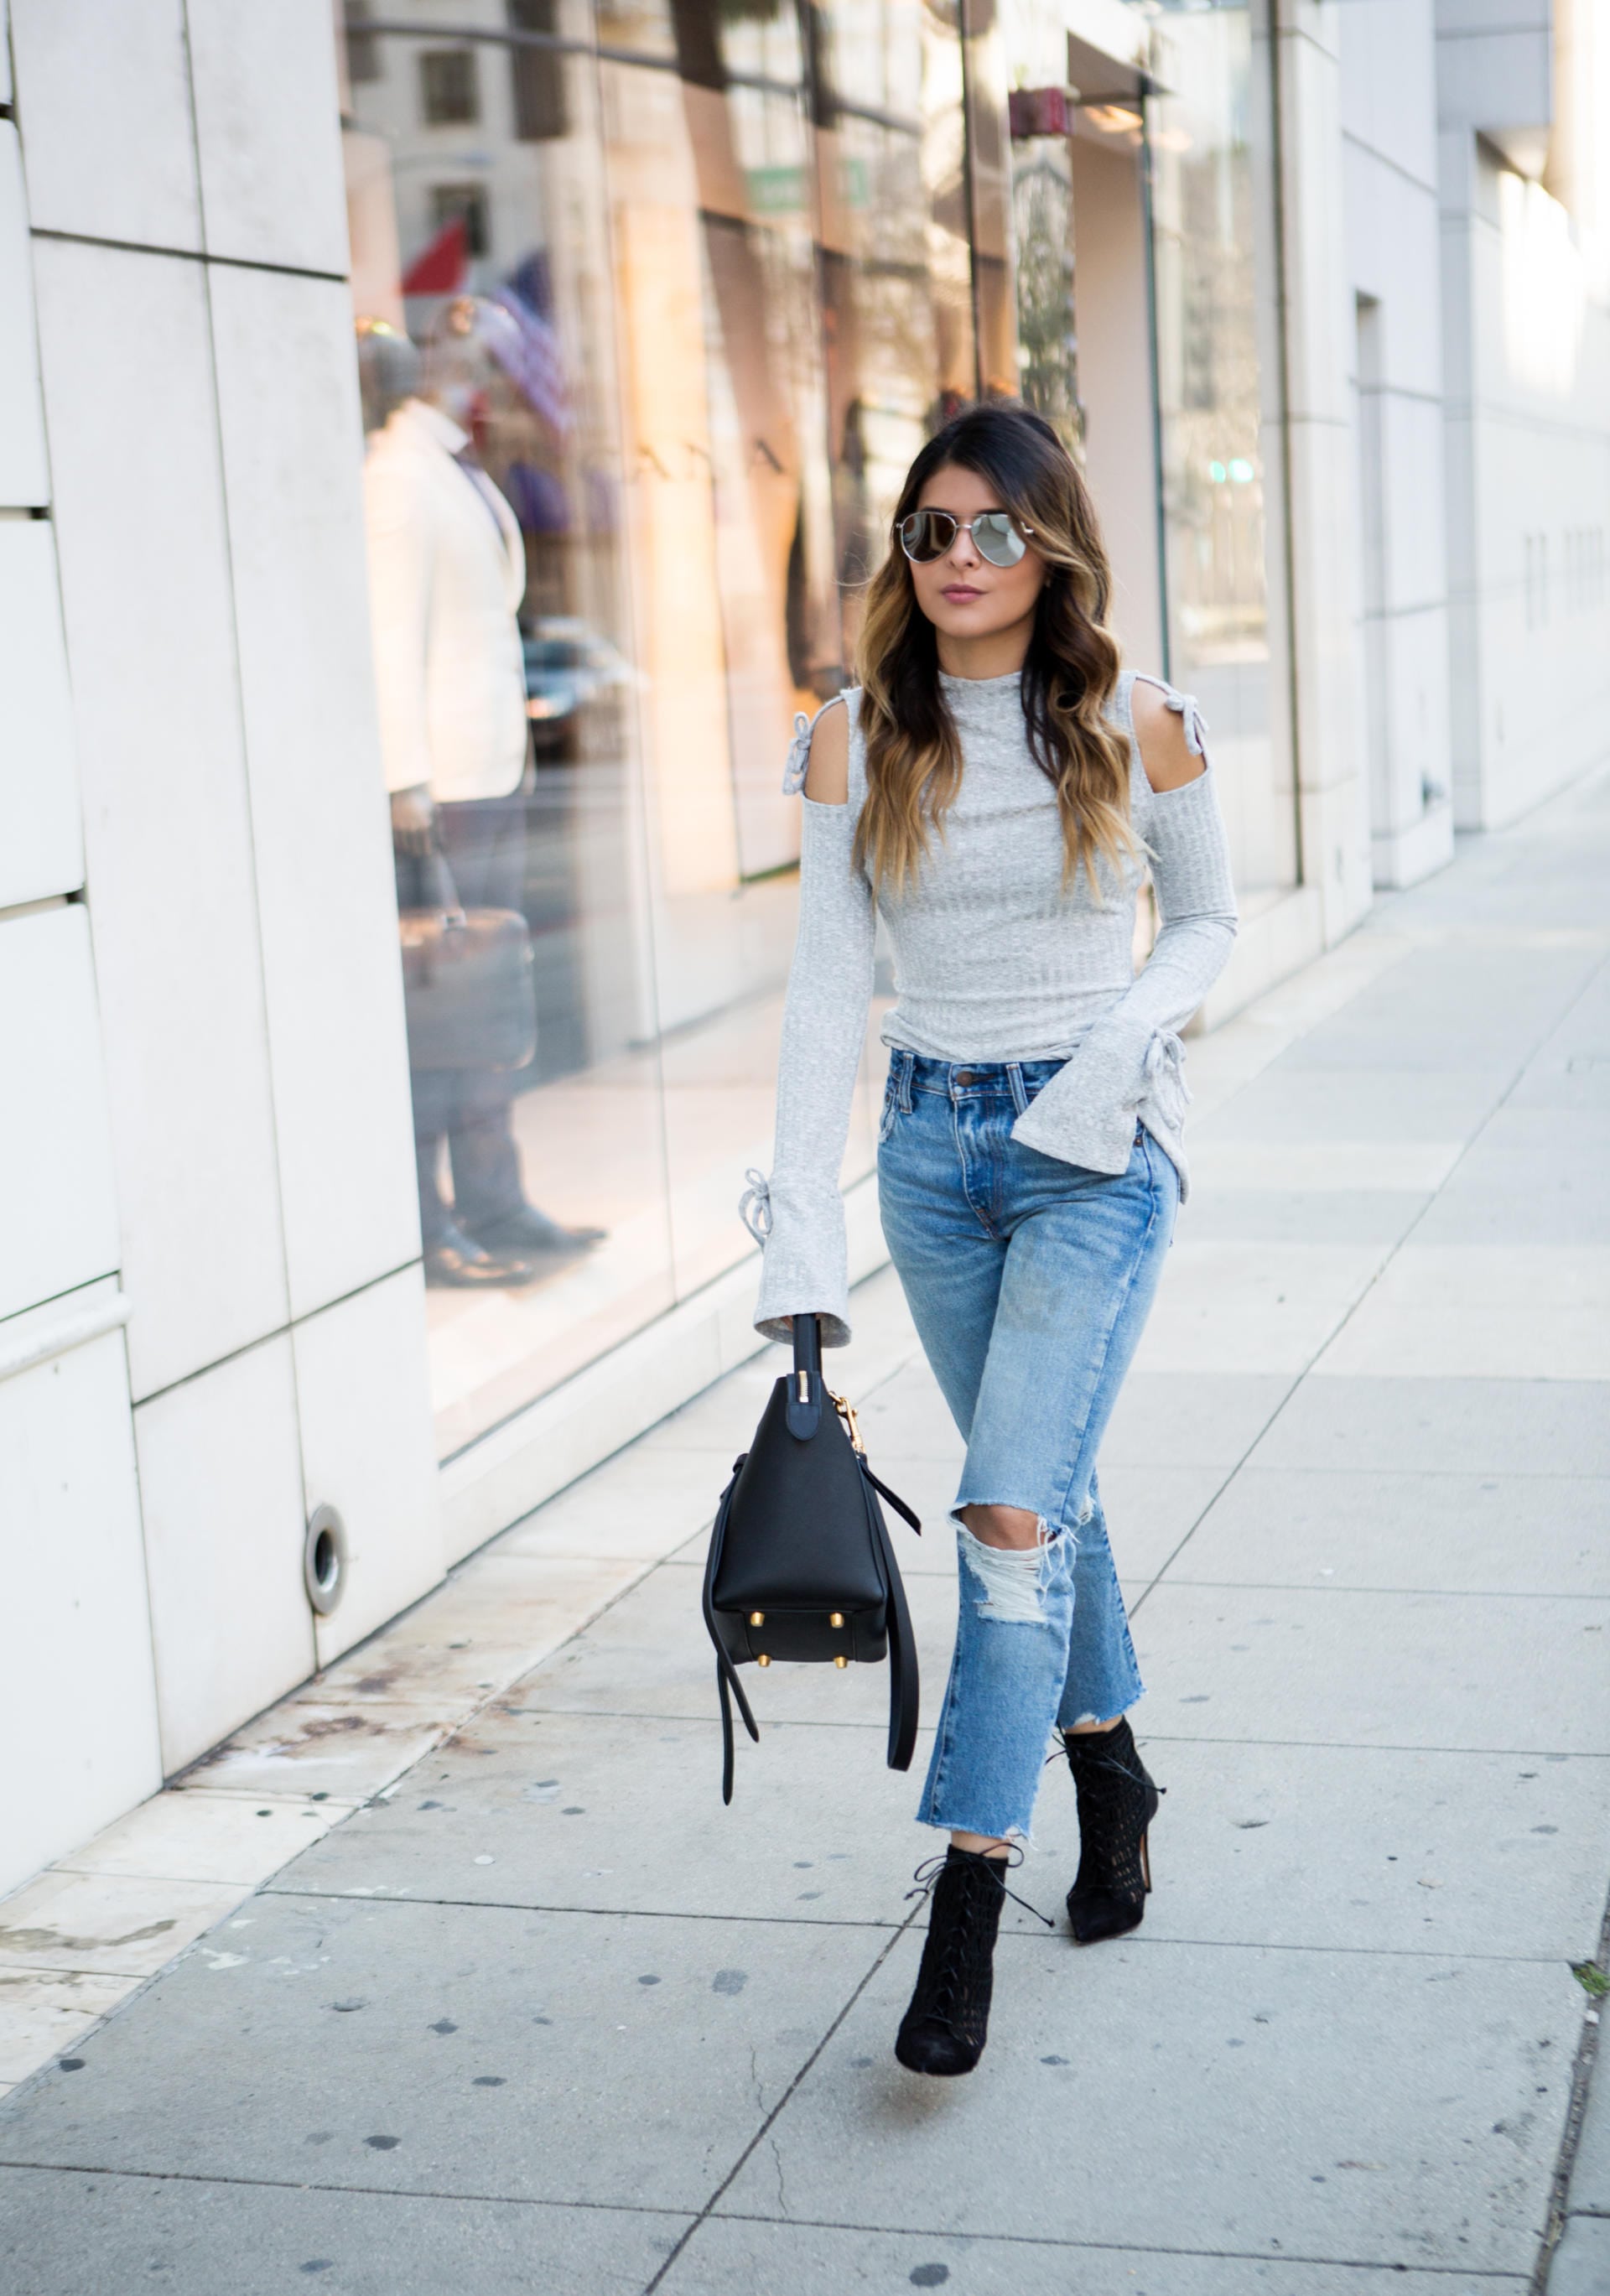 An Easy Way to Wear the Bell Sleeve Trend | The Girl From Panama